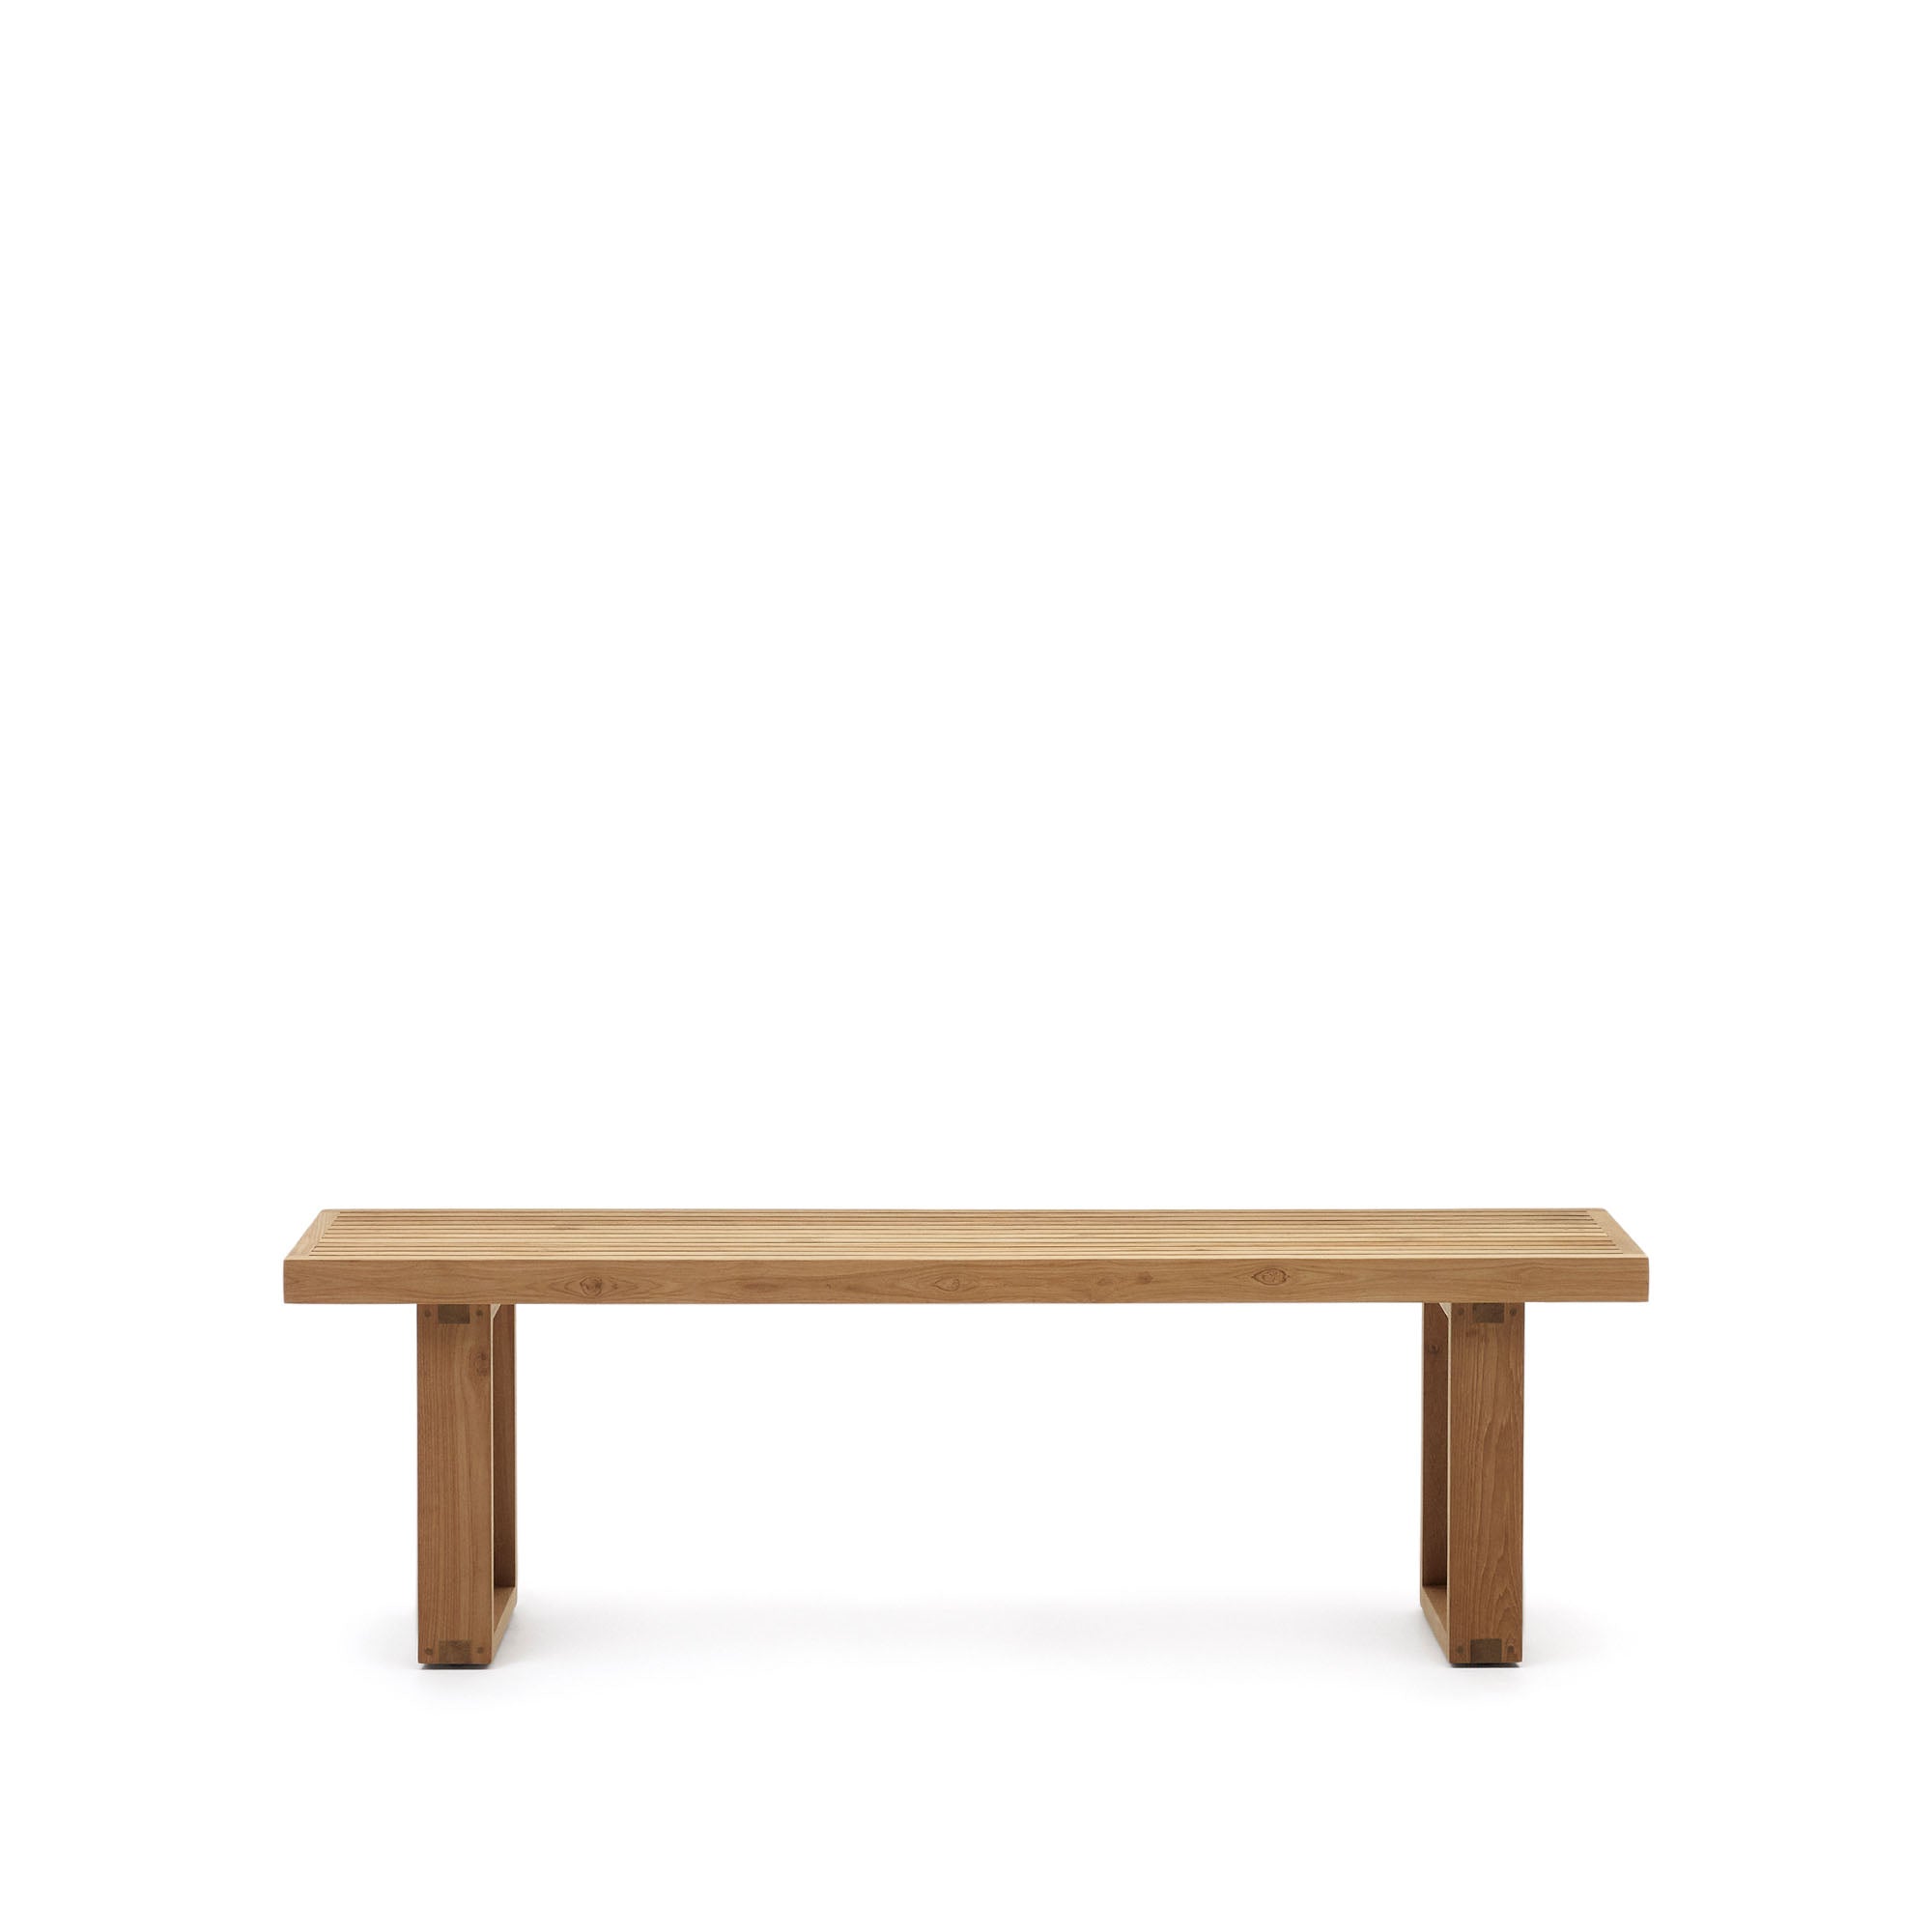 Canadell 100% outdoor solid recycled teak bench, 170 cm